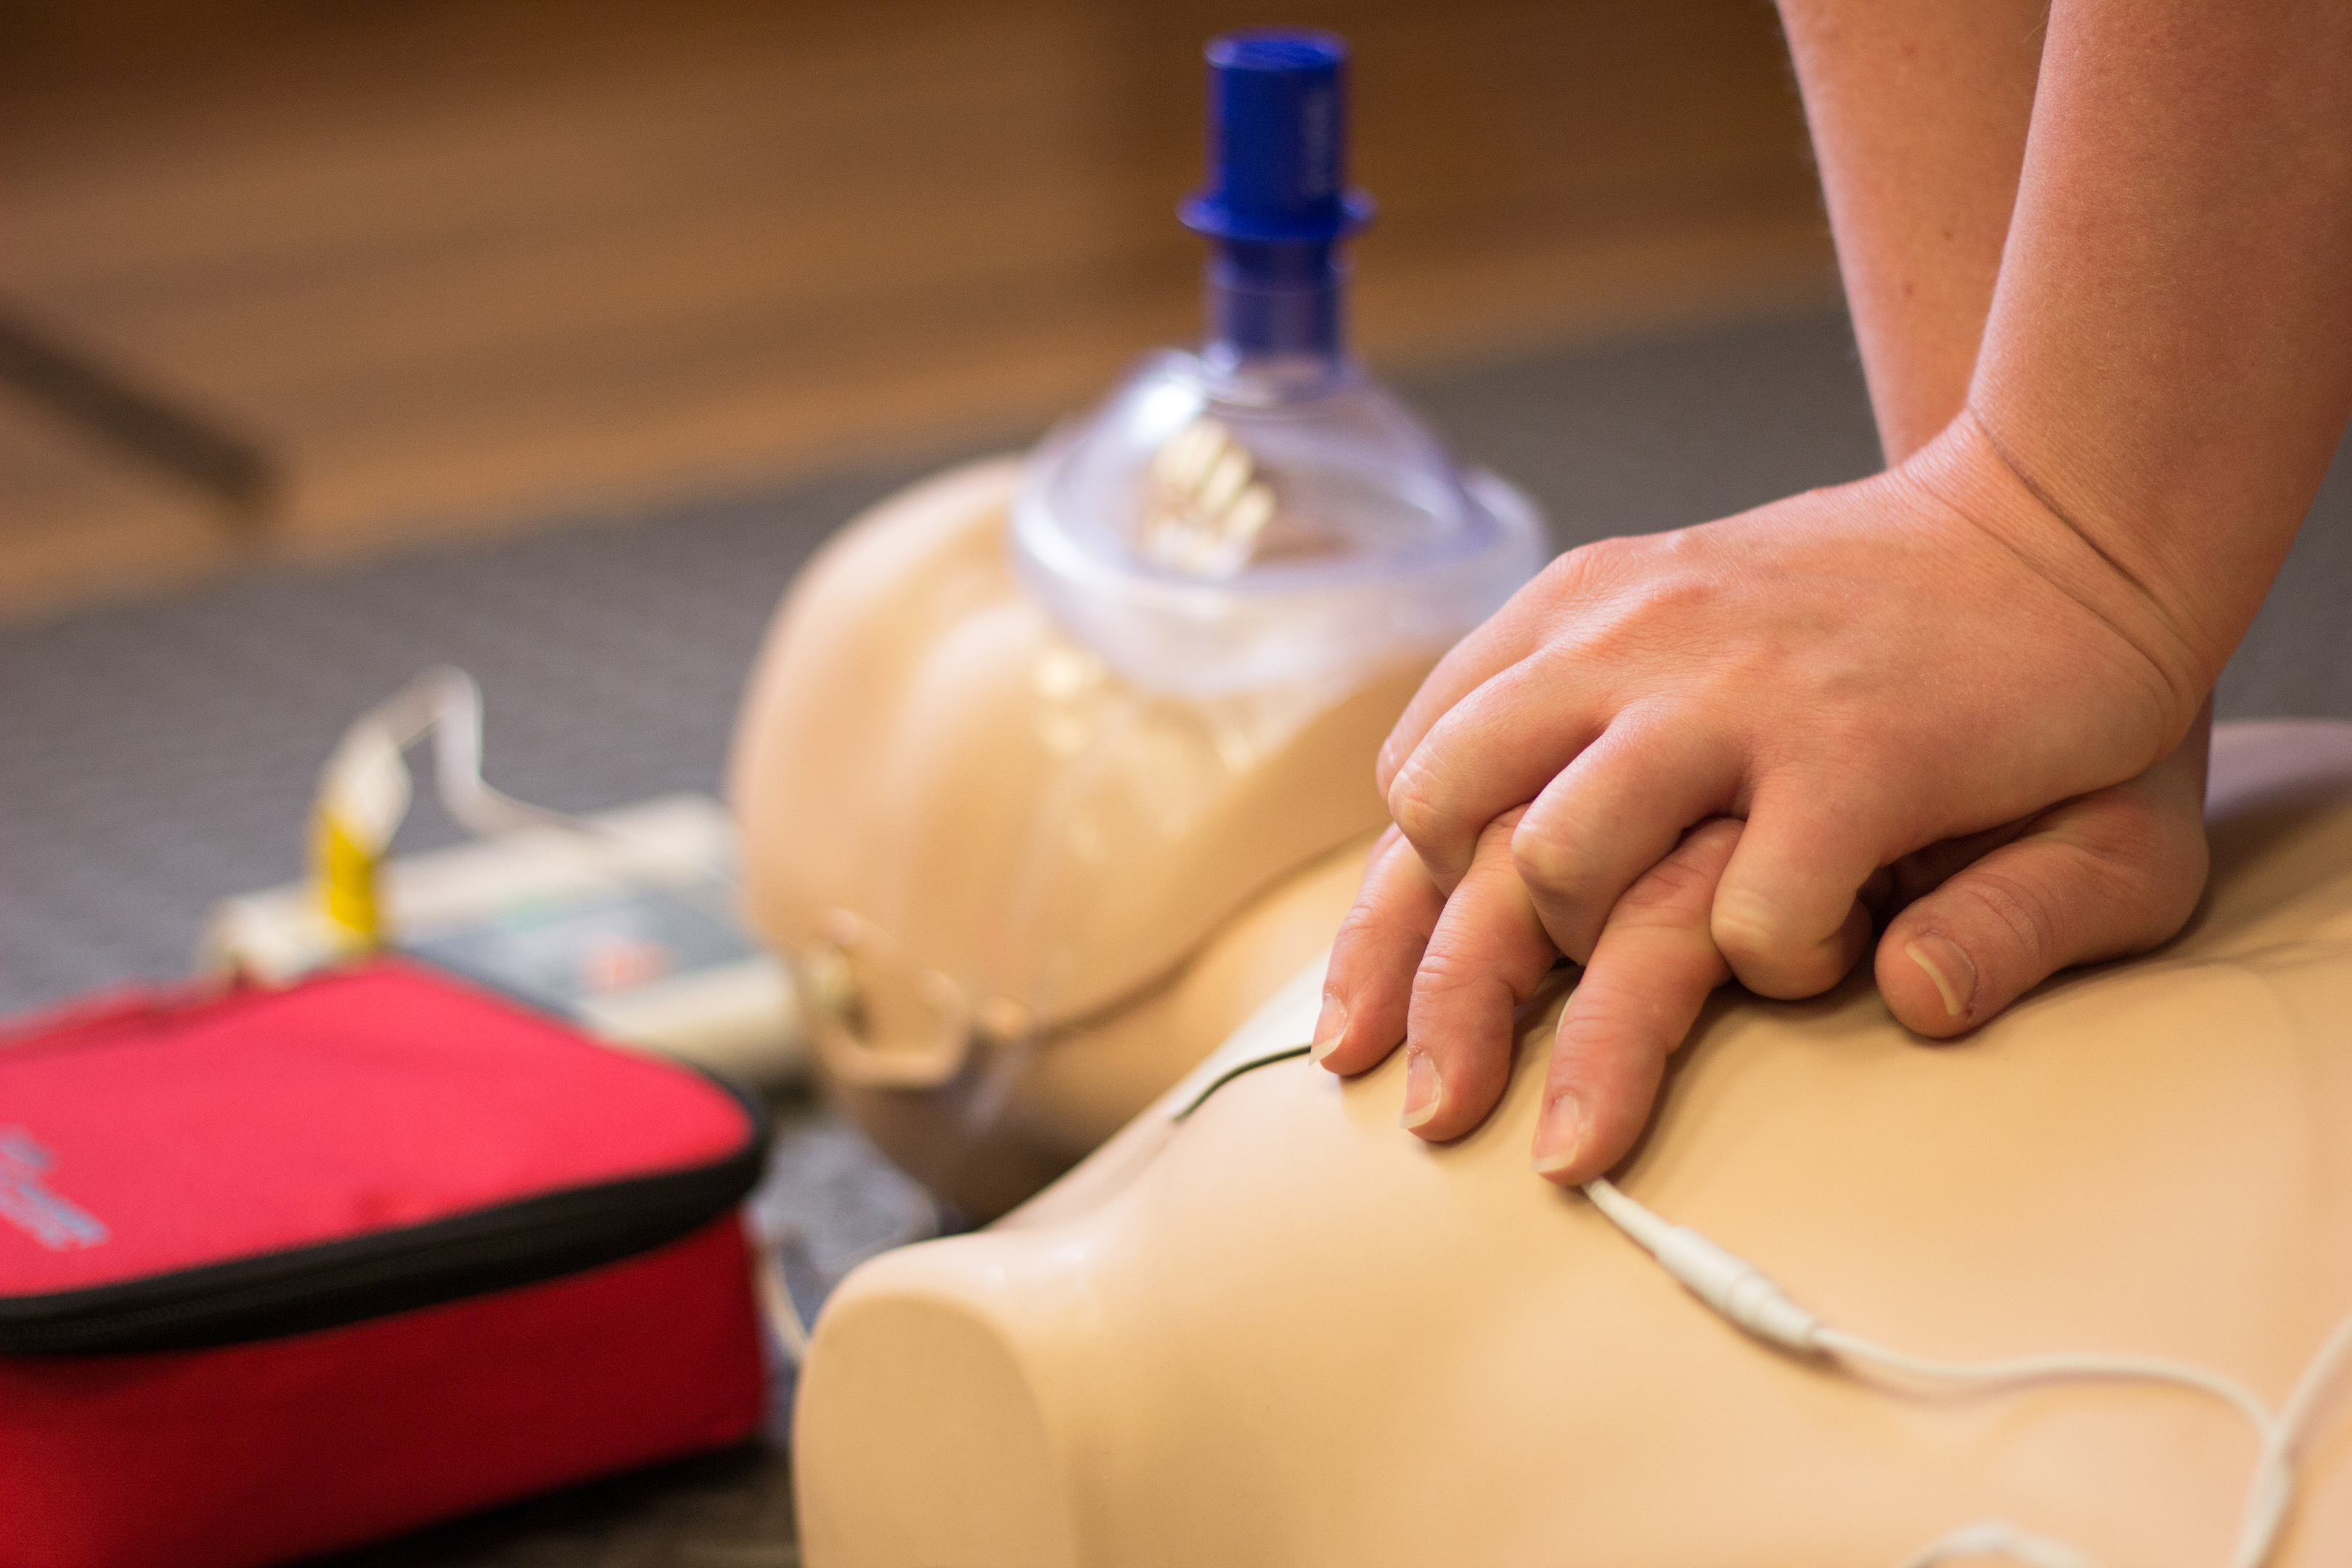 Figures revealed people living in the most deprived areas are 43% less likely to survive an out of hospital cardiac arrest (OHCA) than those living in more affluent places (iStock)